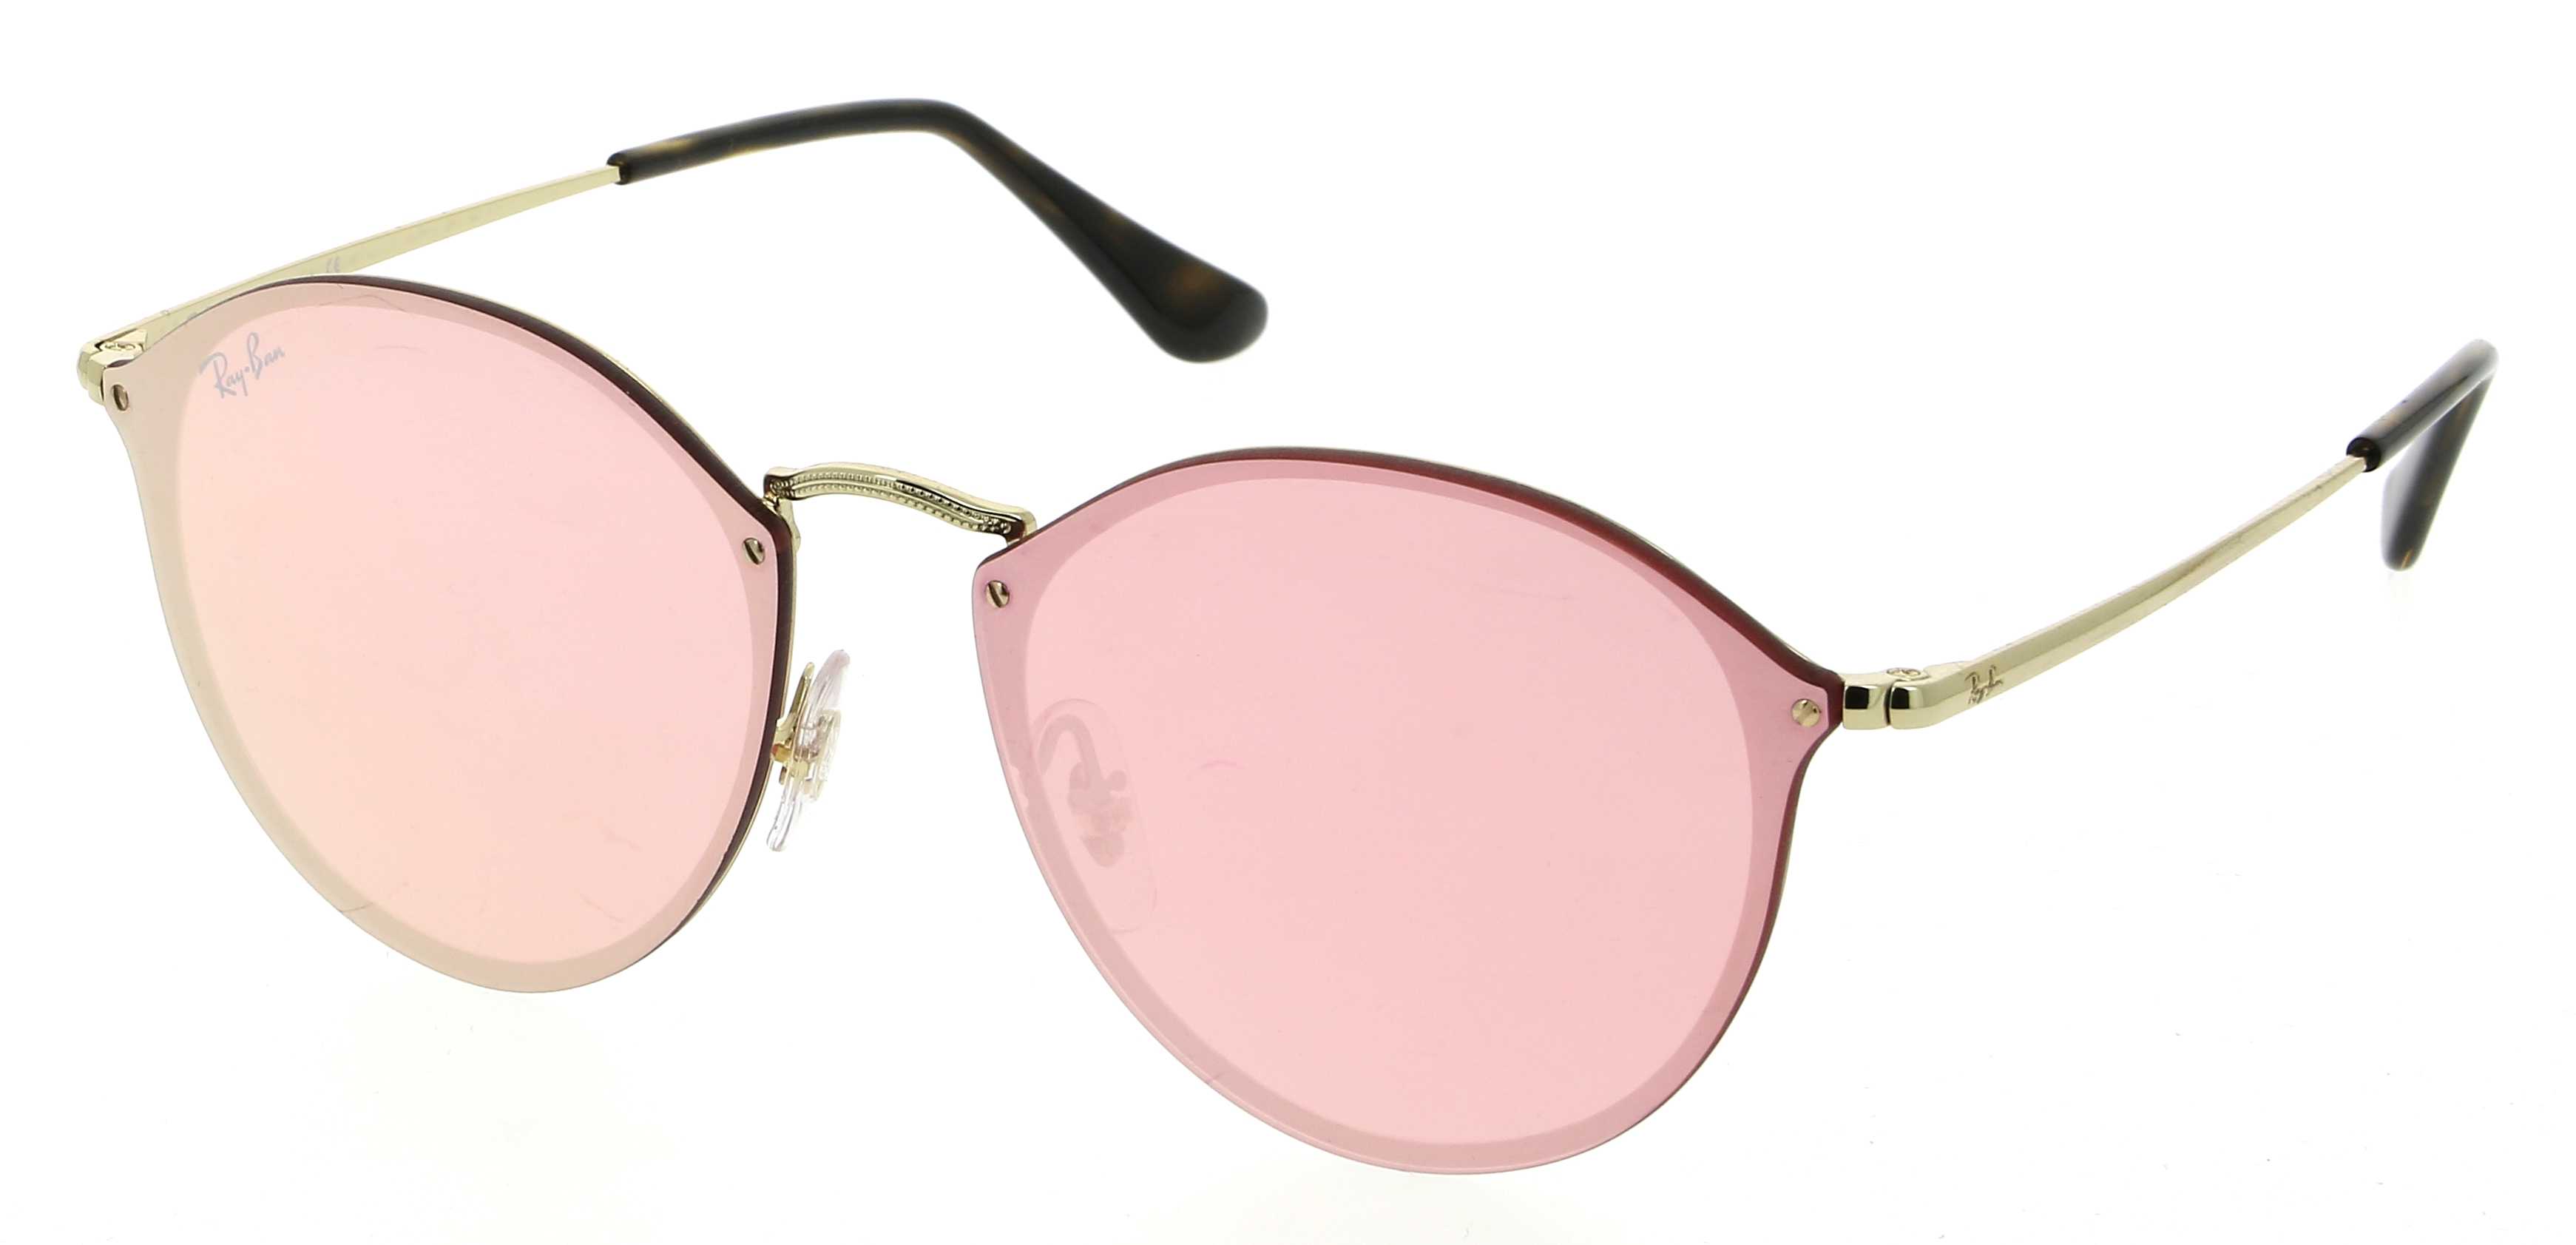 ray ban lunettes femme rose